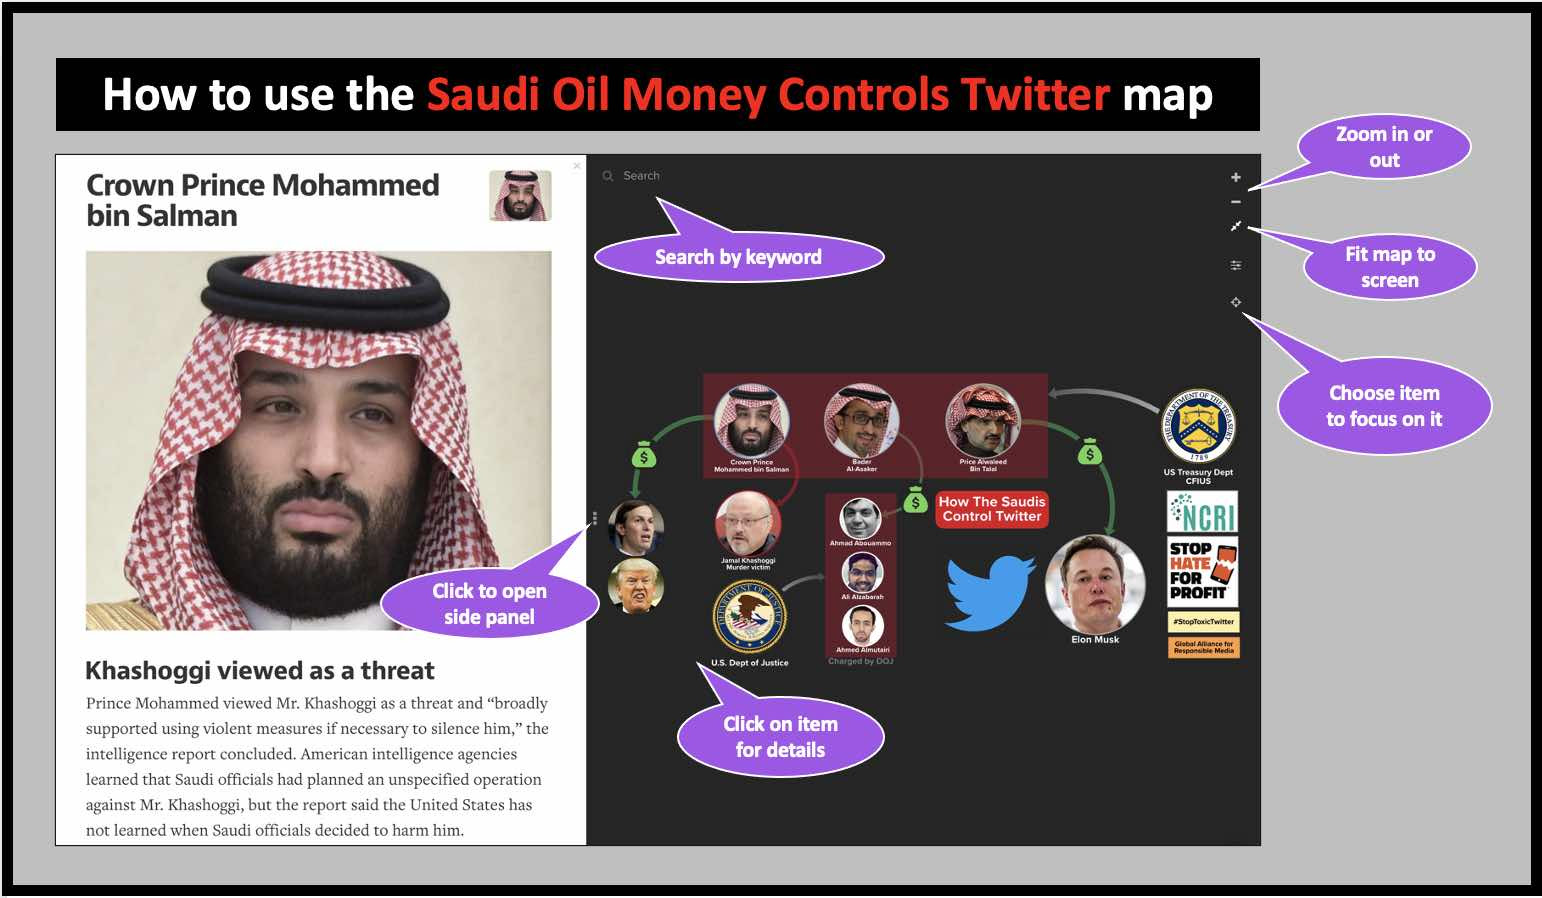 How to use the Saudi oil money buys them control over Twitter